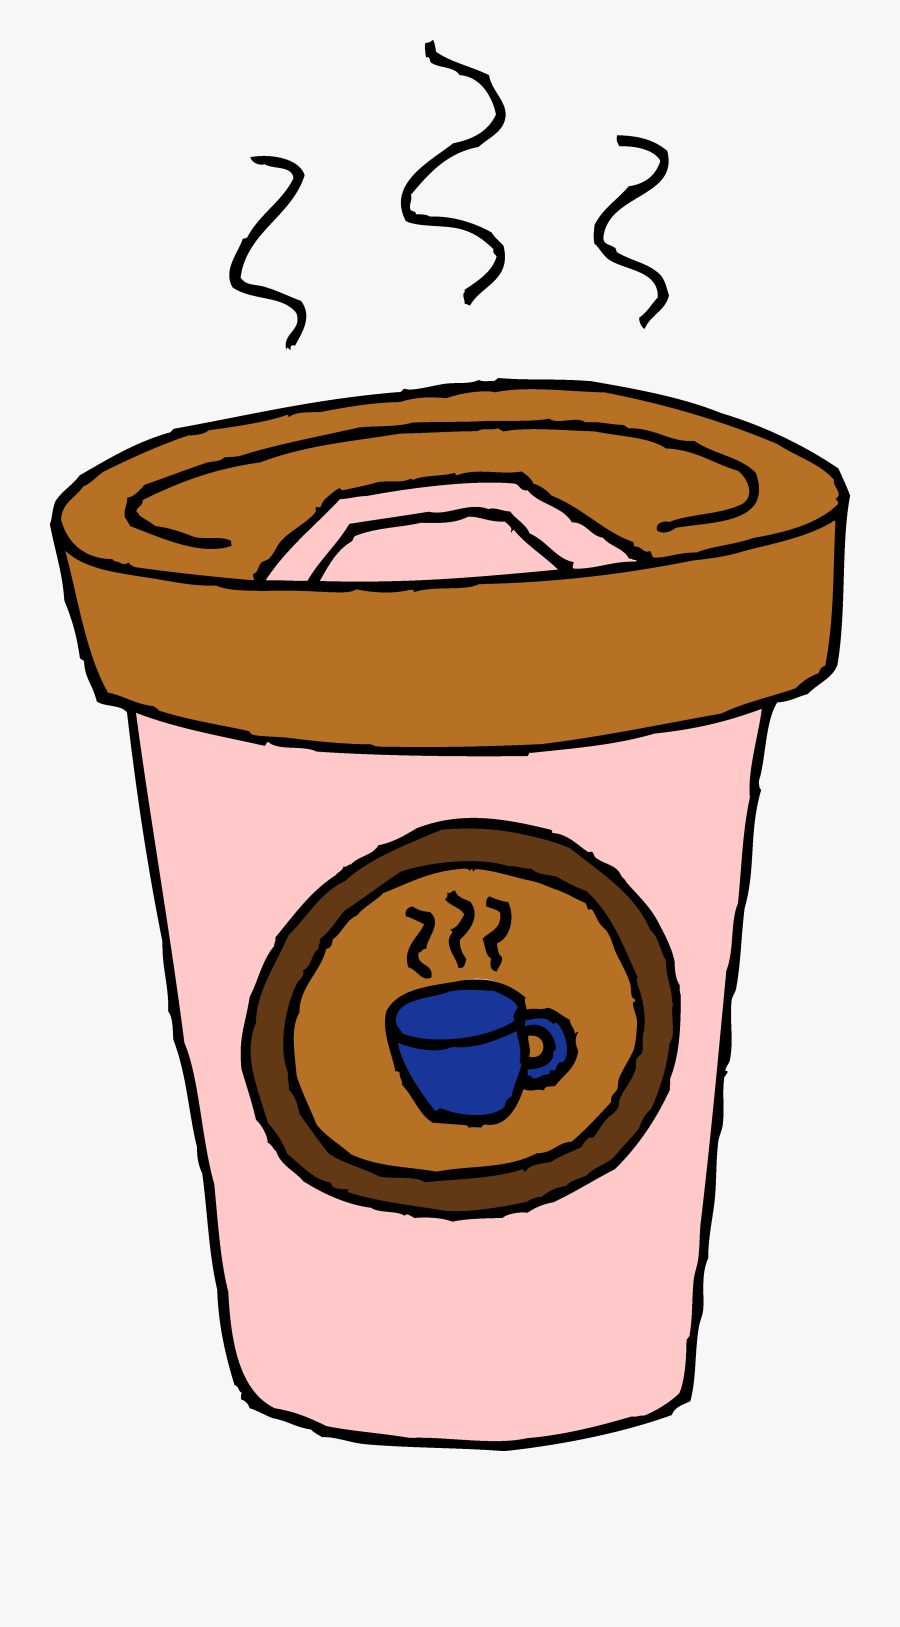 Pic Breakfast Clip Art Coffee - Coffee Clipart, Transparent Clipart